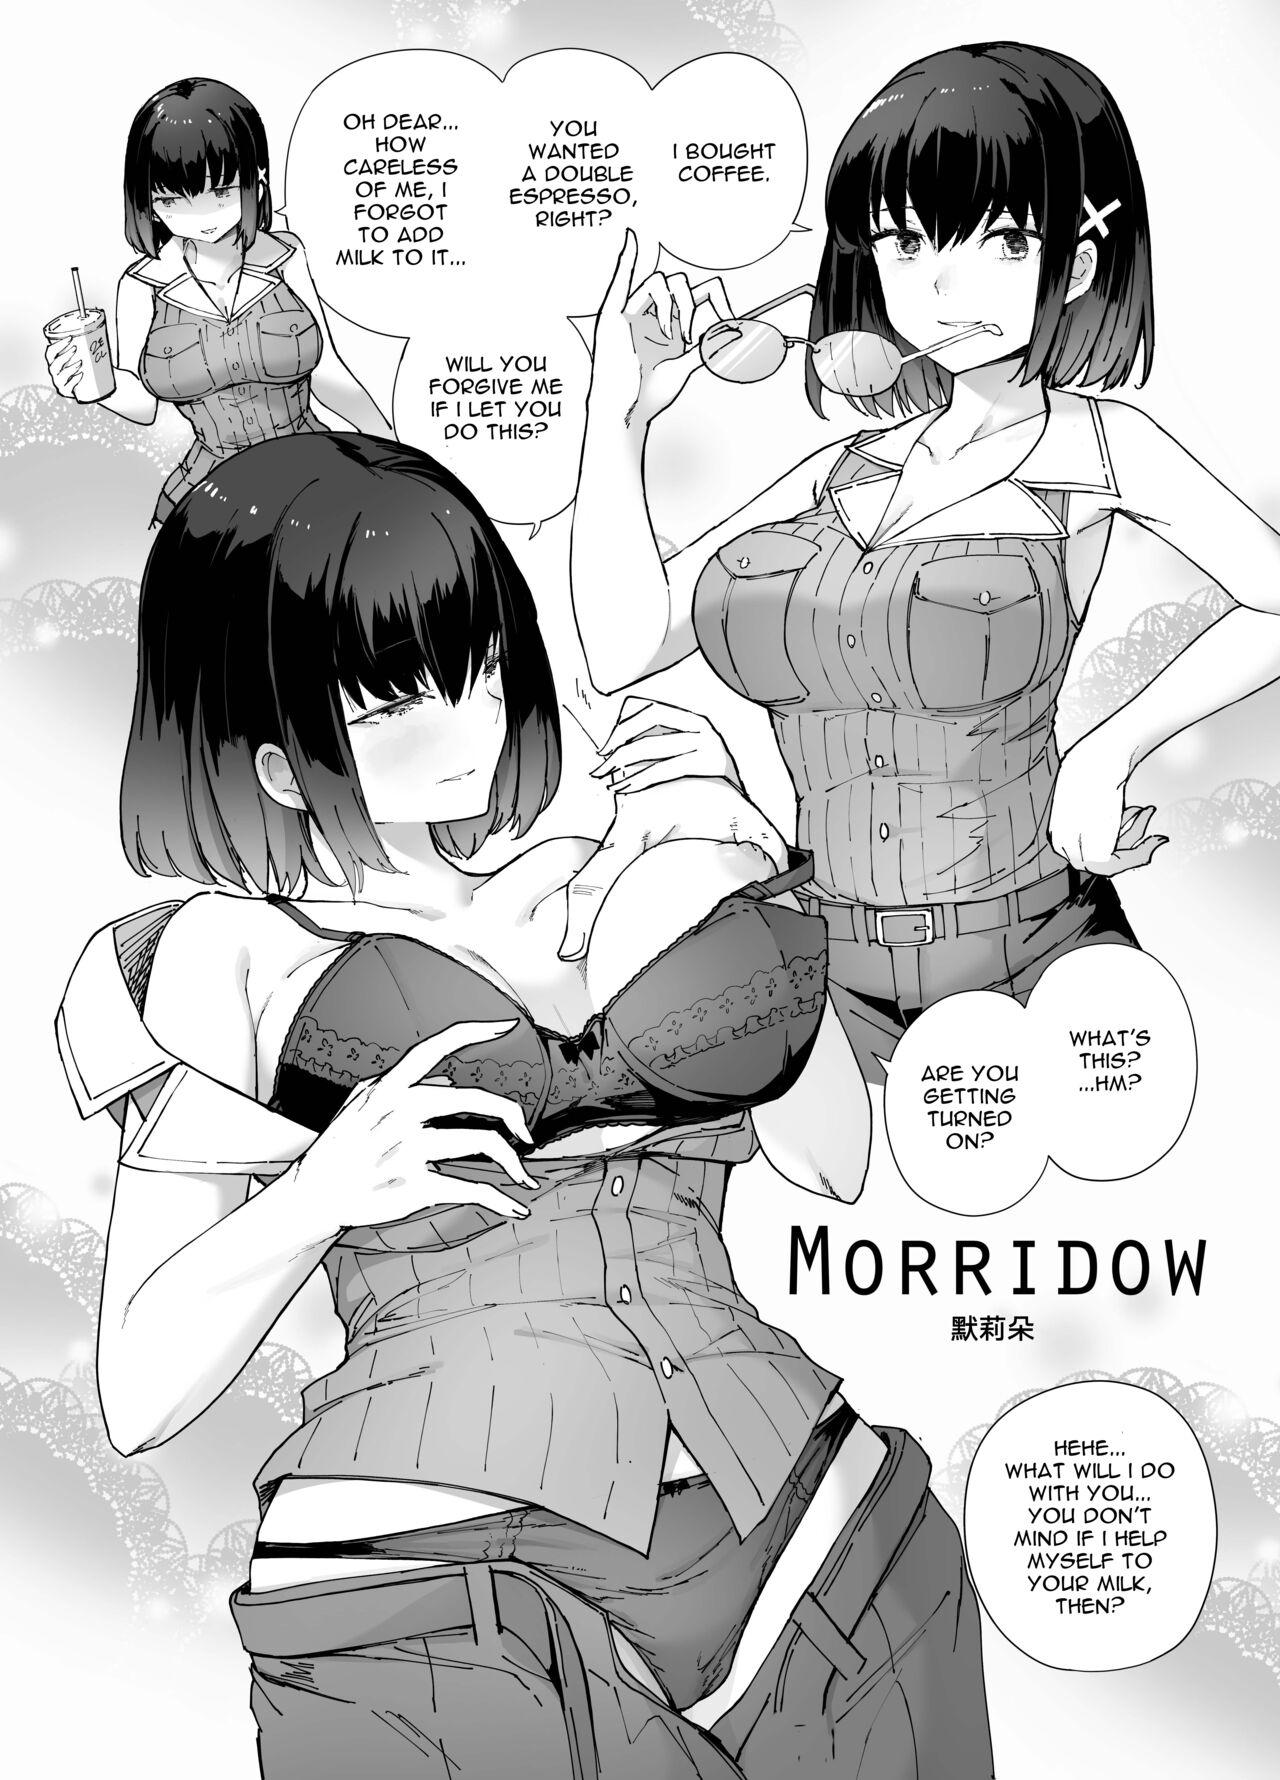 Camshow NPC & Mobs 12p Issue - Girls frontline Big Dicks - Page 2